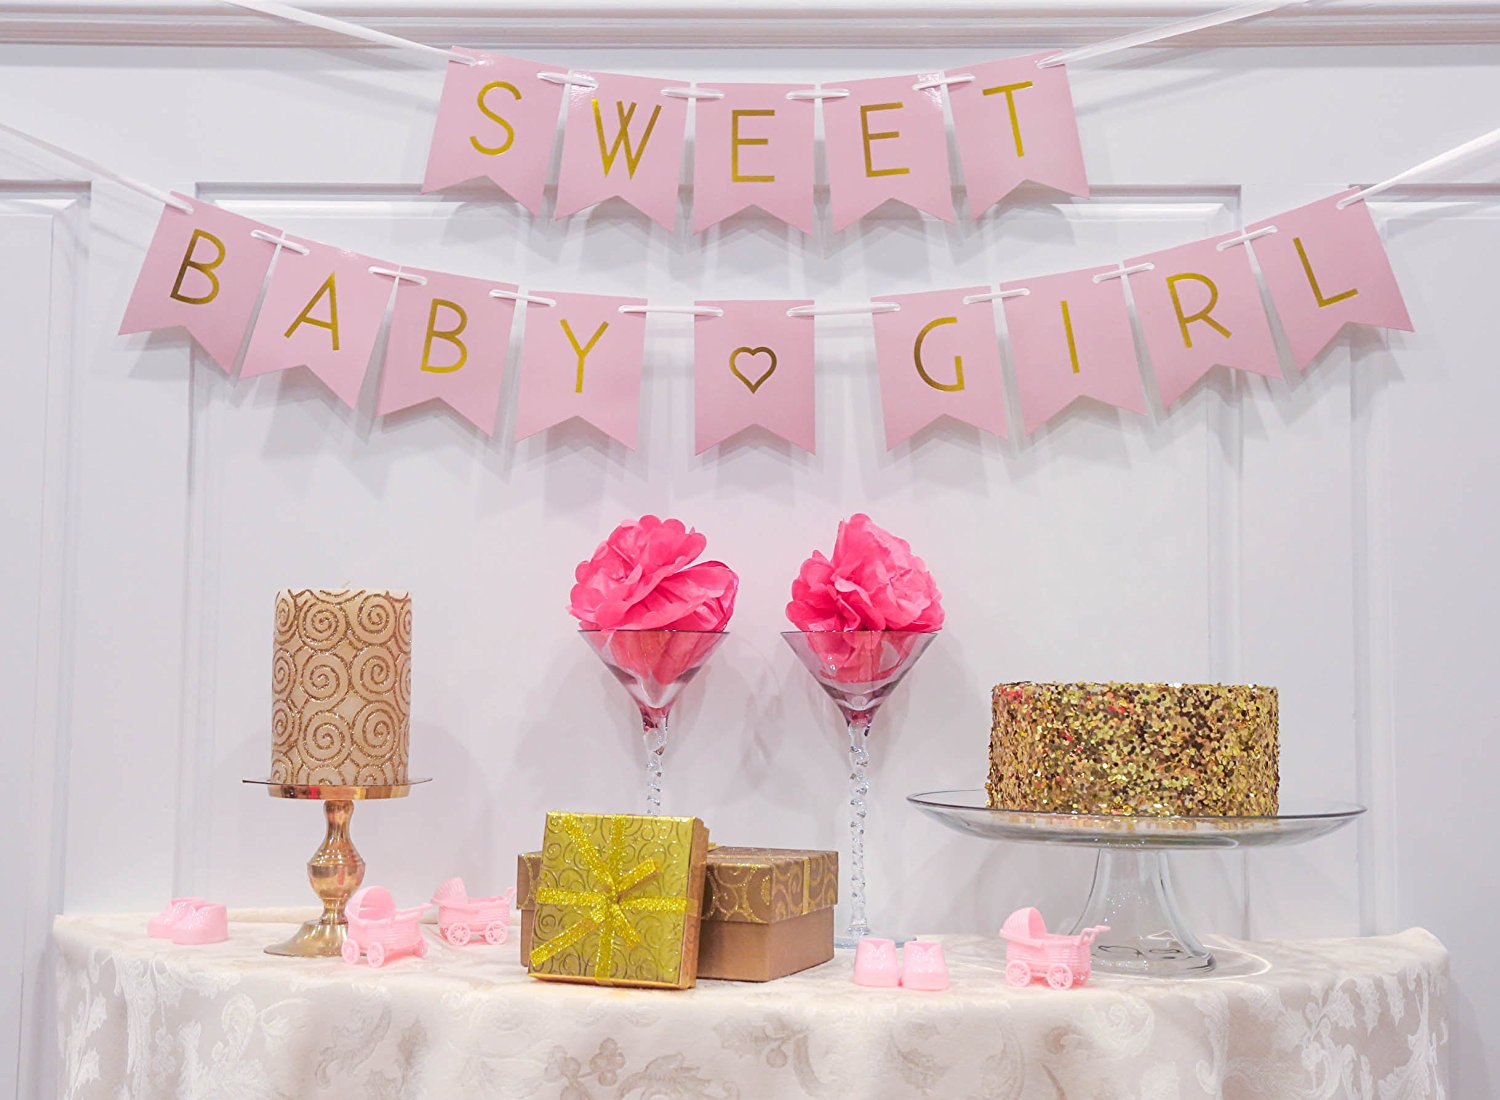 Full Size of Baby Shower:89+ Indulging Baby Shower Banner Picture Inspirations Baby Shower Banner Amazoncom Baby Shower Decorations For Pastel Pink Sweet Amazoncom Baby Shower Decorations For Pastel Pink Sweet Baby Banner Gender Reveal Baby Announcement Toys Games